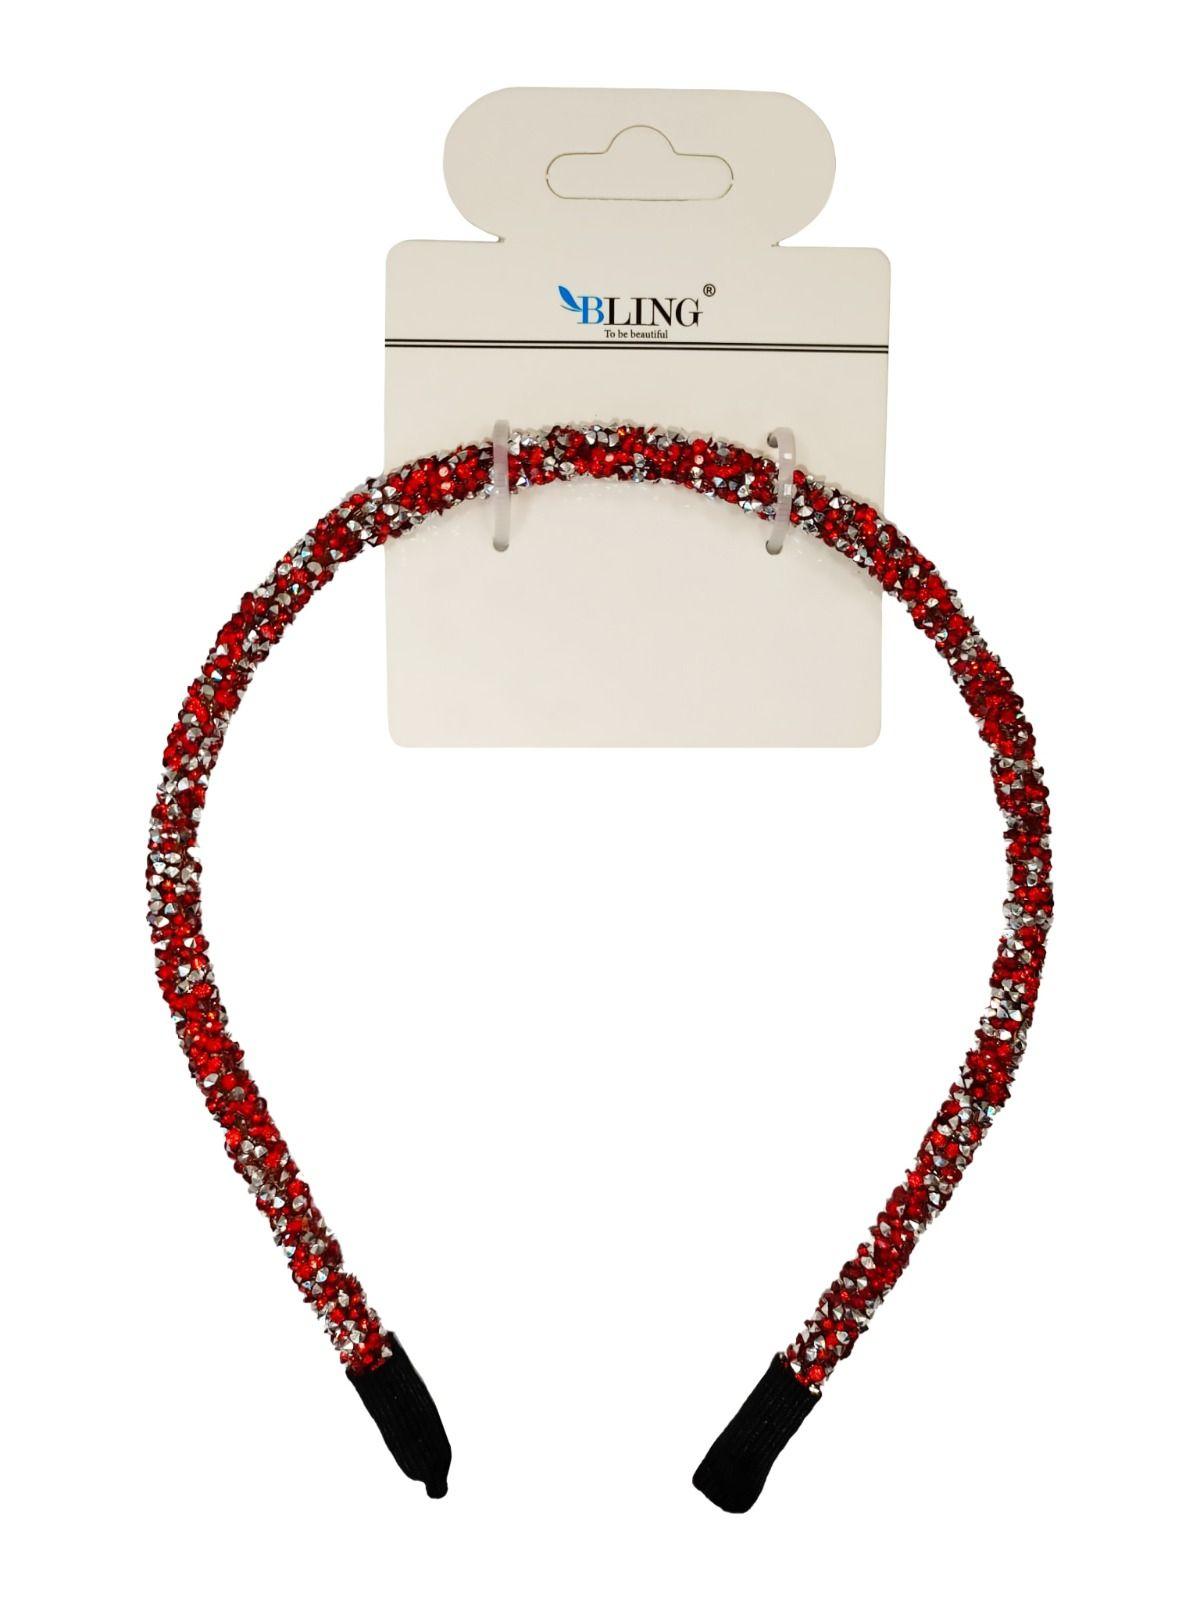 BLING hairband with dewlap crystals - red silver